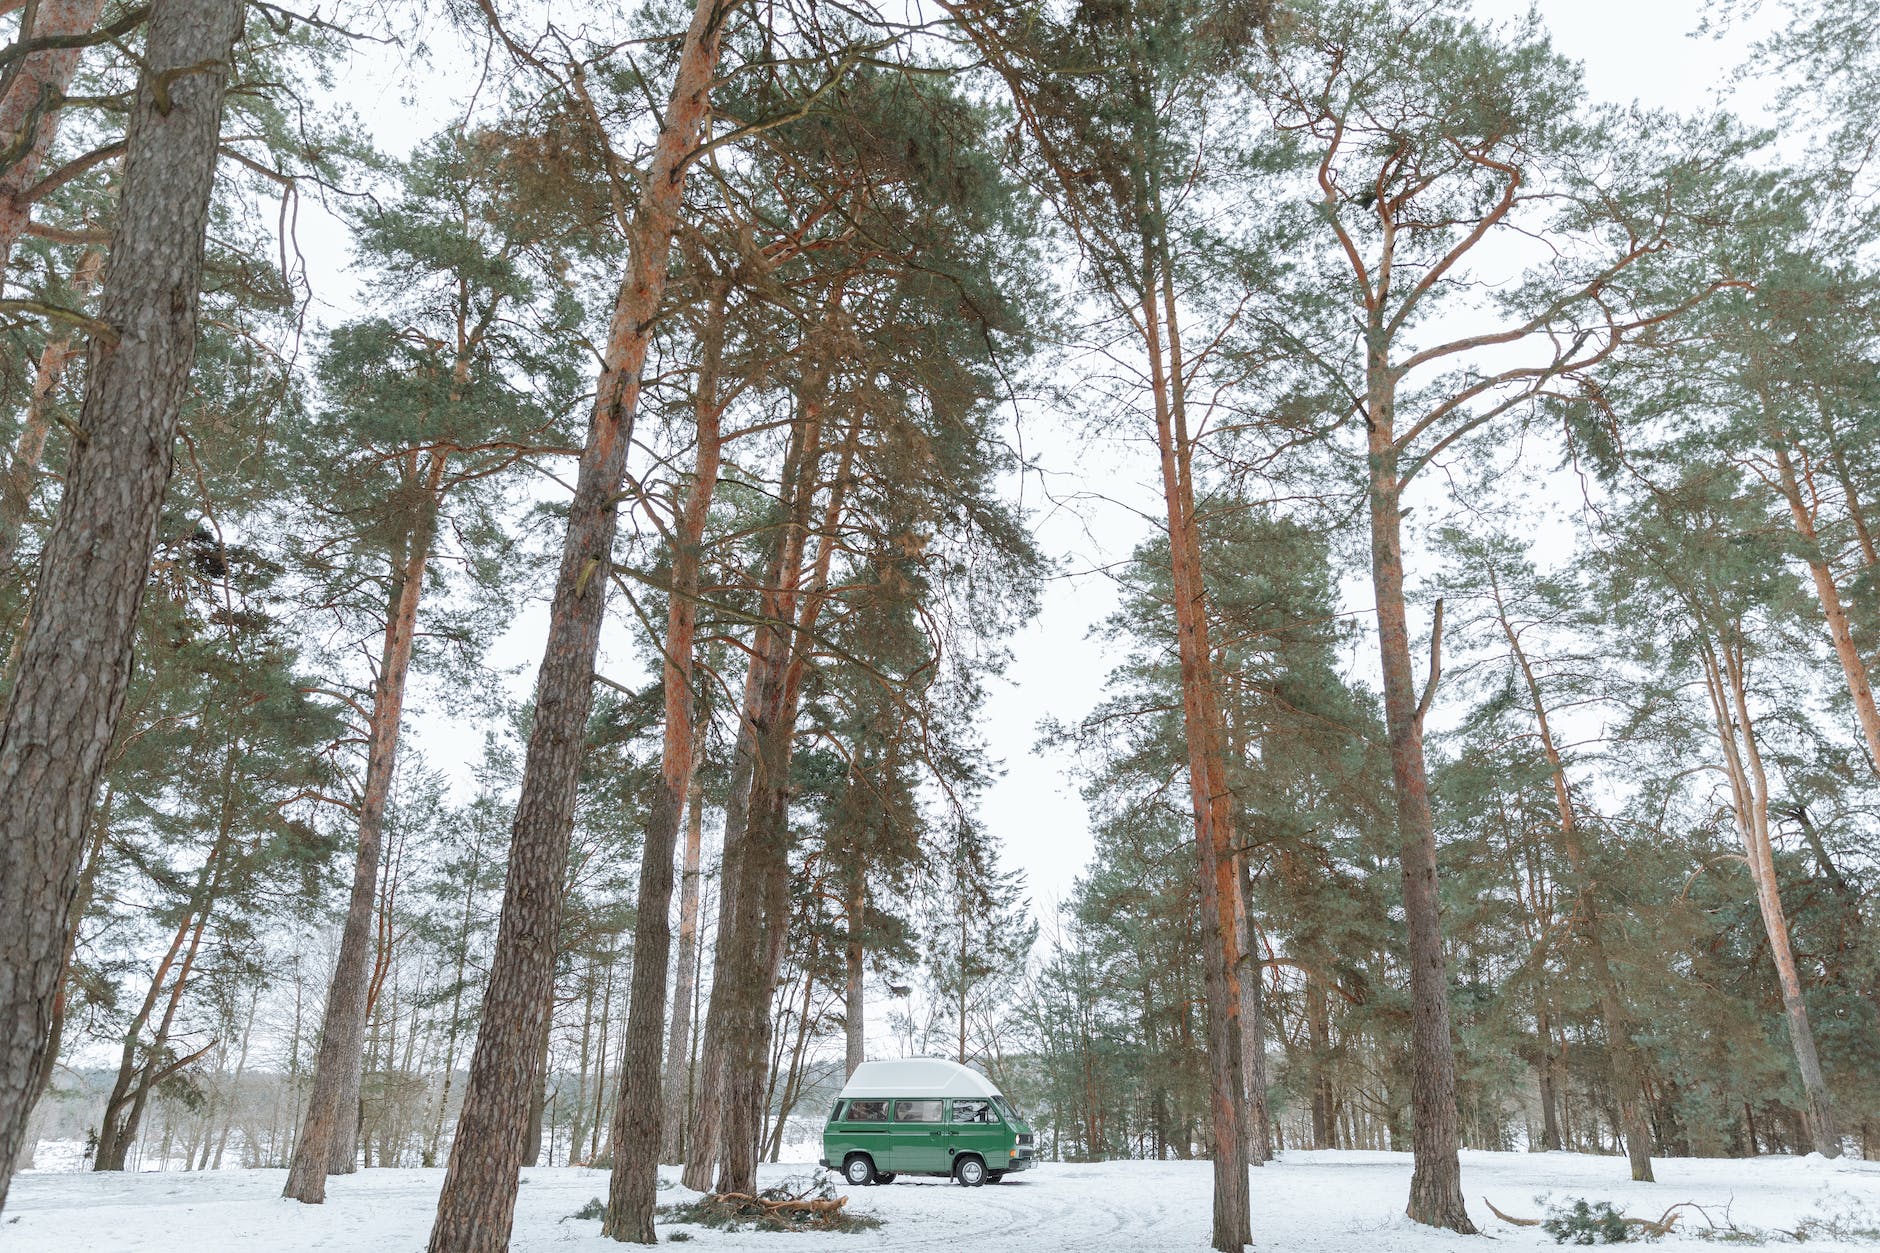 camper van parked on a forest with tall trees